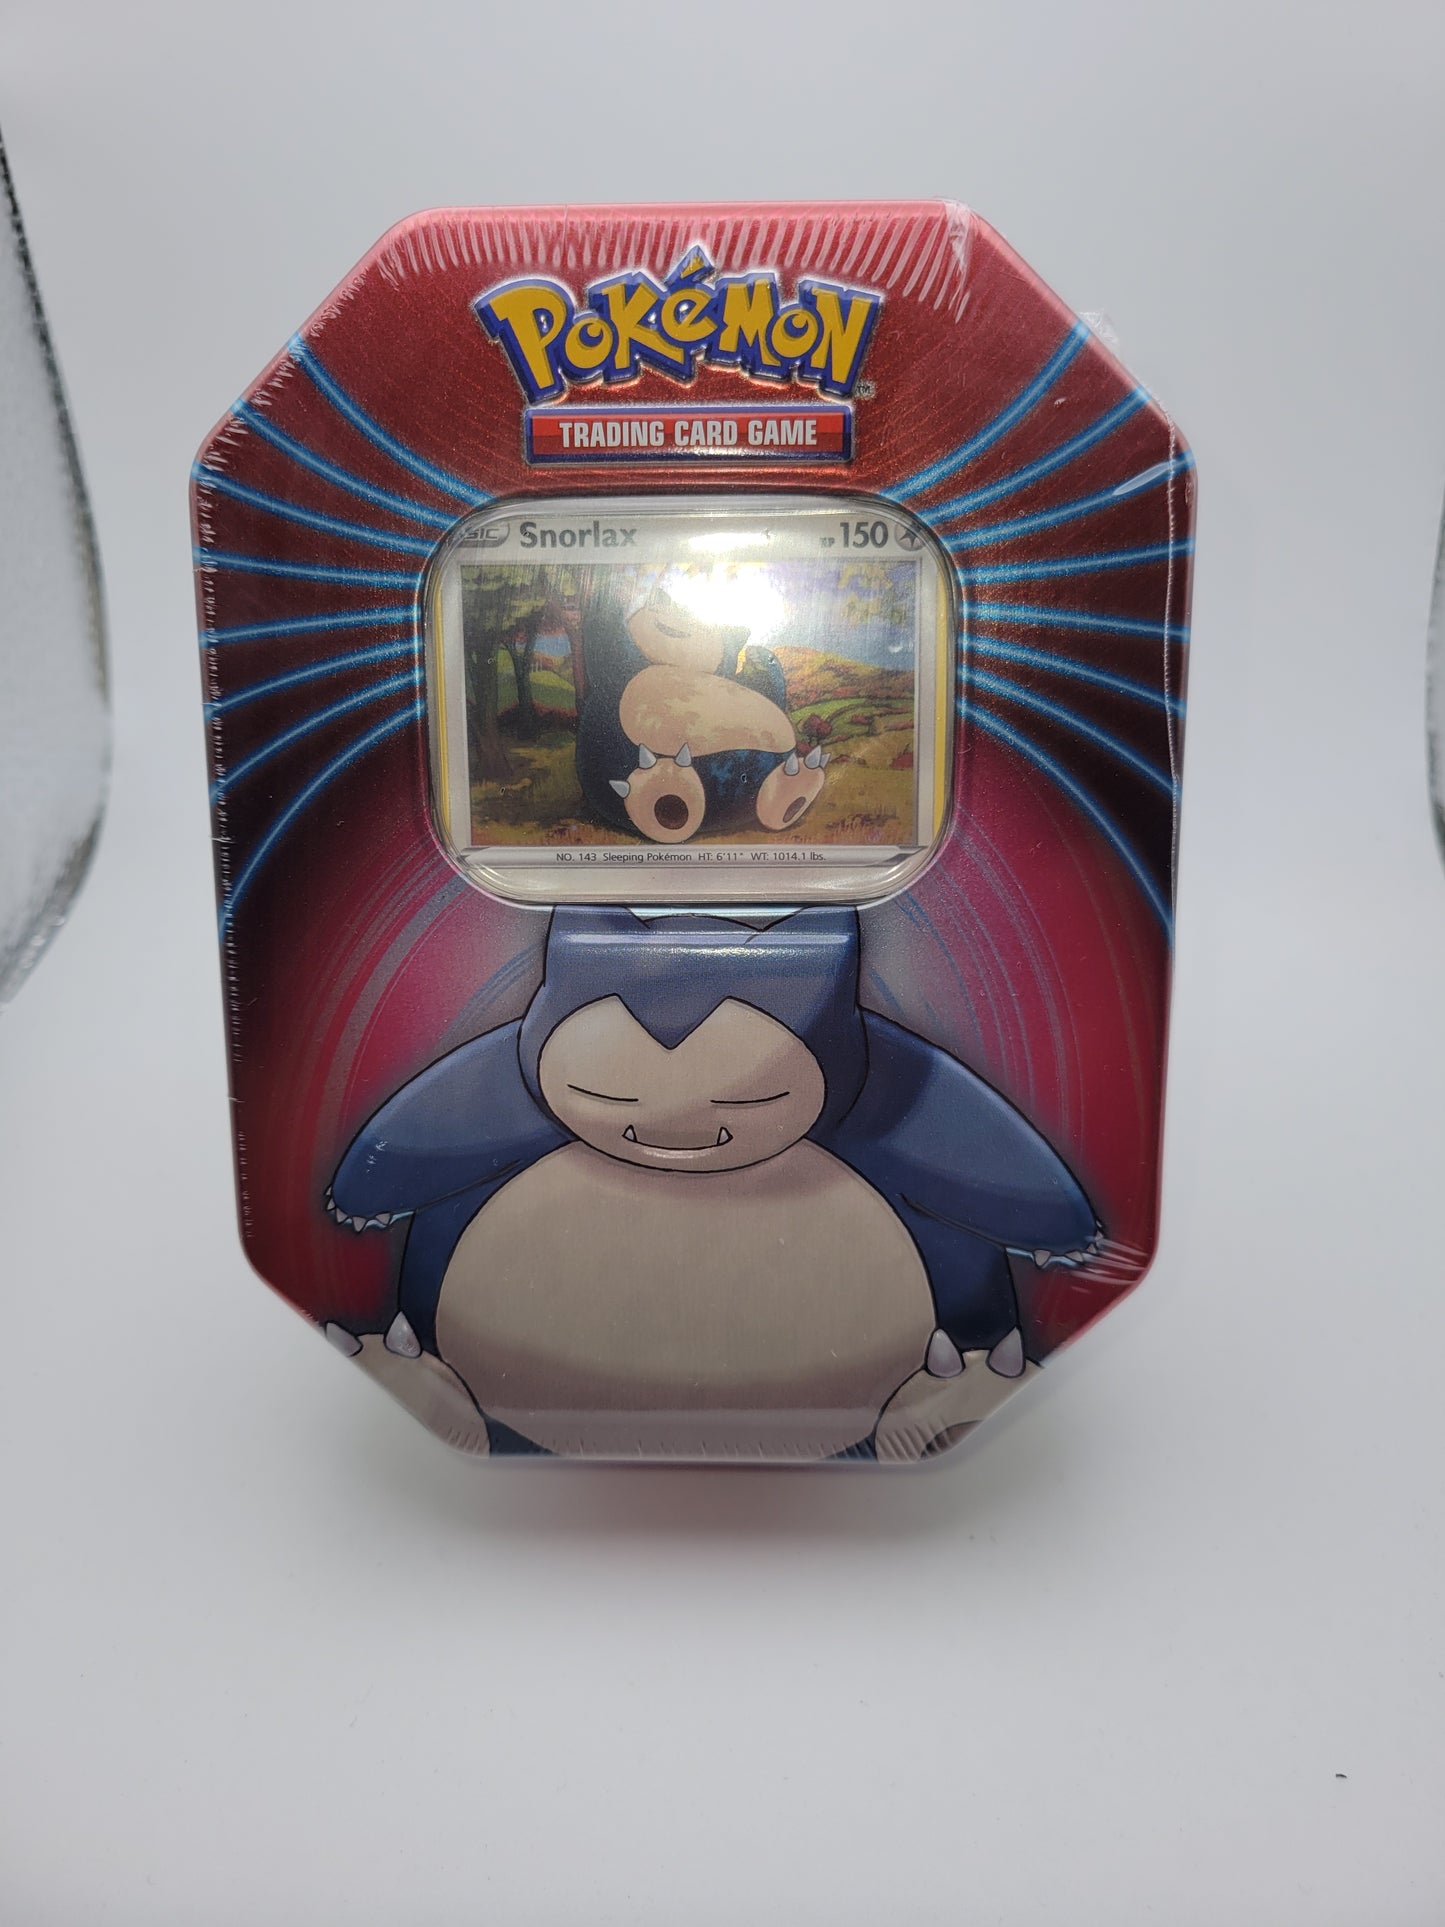 Each tin contains 3 Pokemon TCG booster packs and a Pokémon Trading Card Game Online code card.